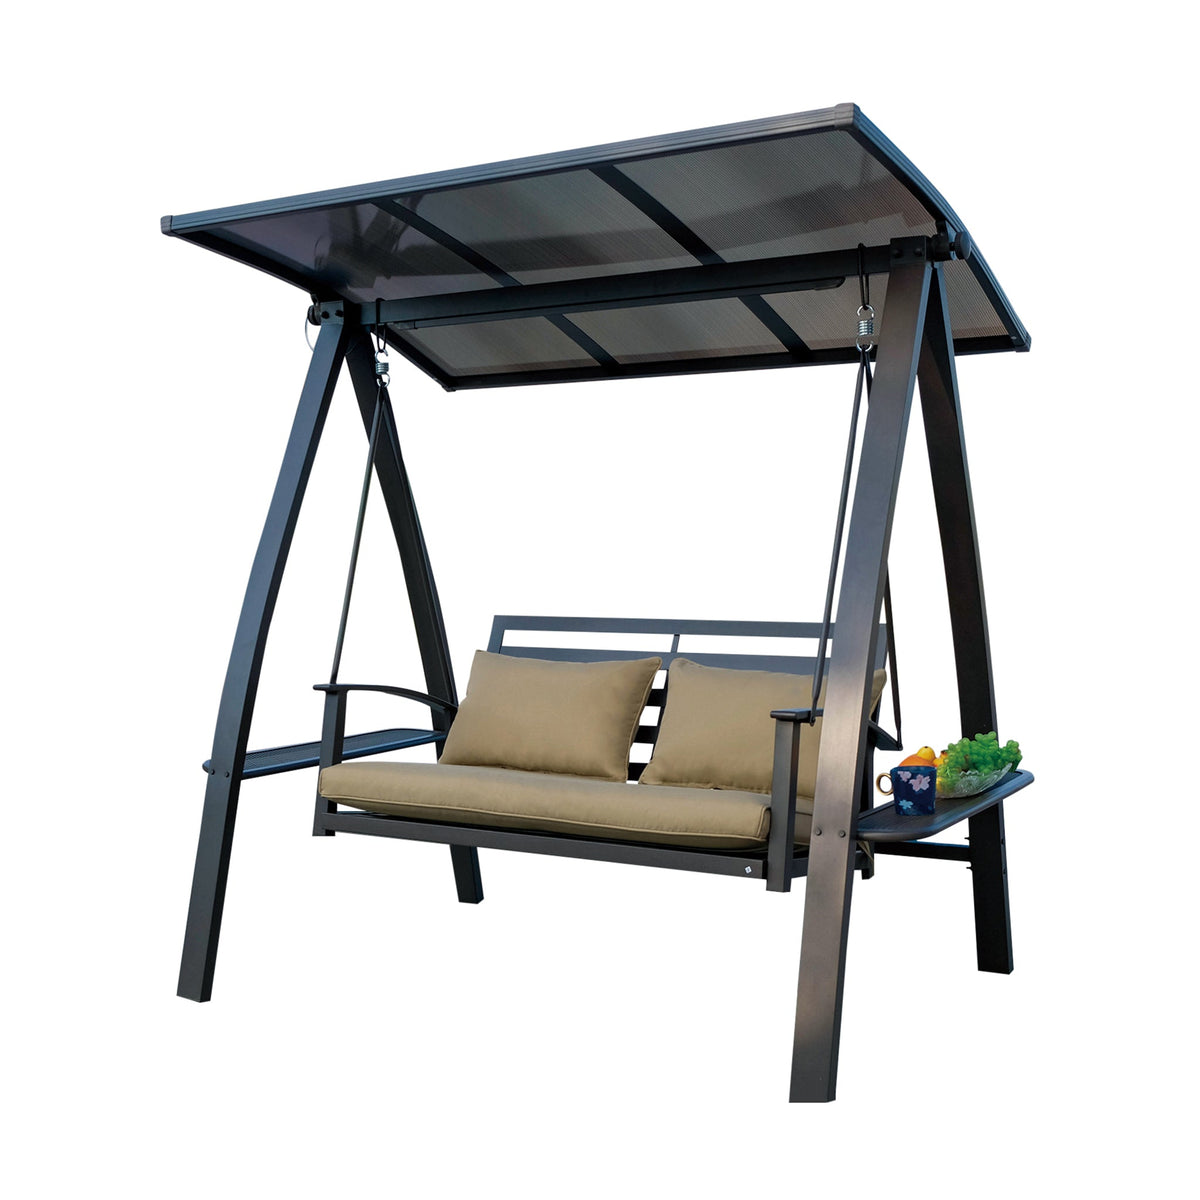 CAPPUCCINO SOLAR POWERED TWO-PERSON SWING